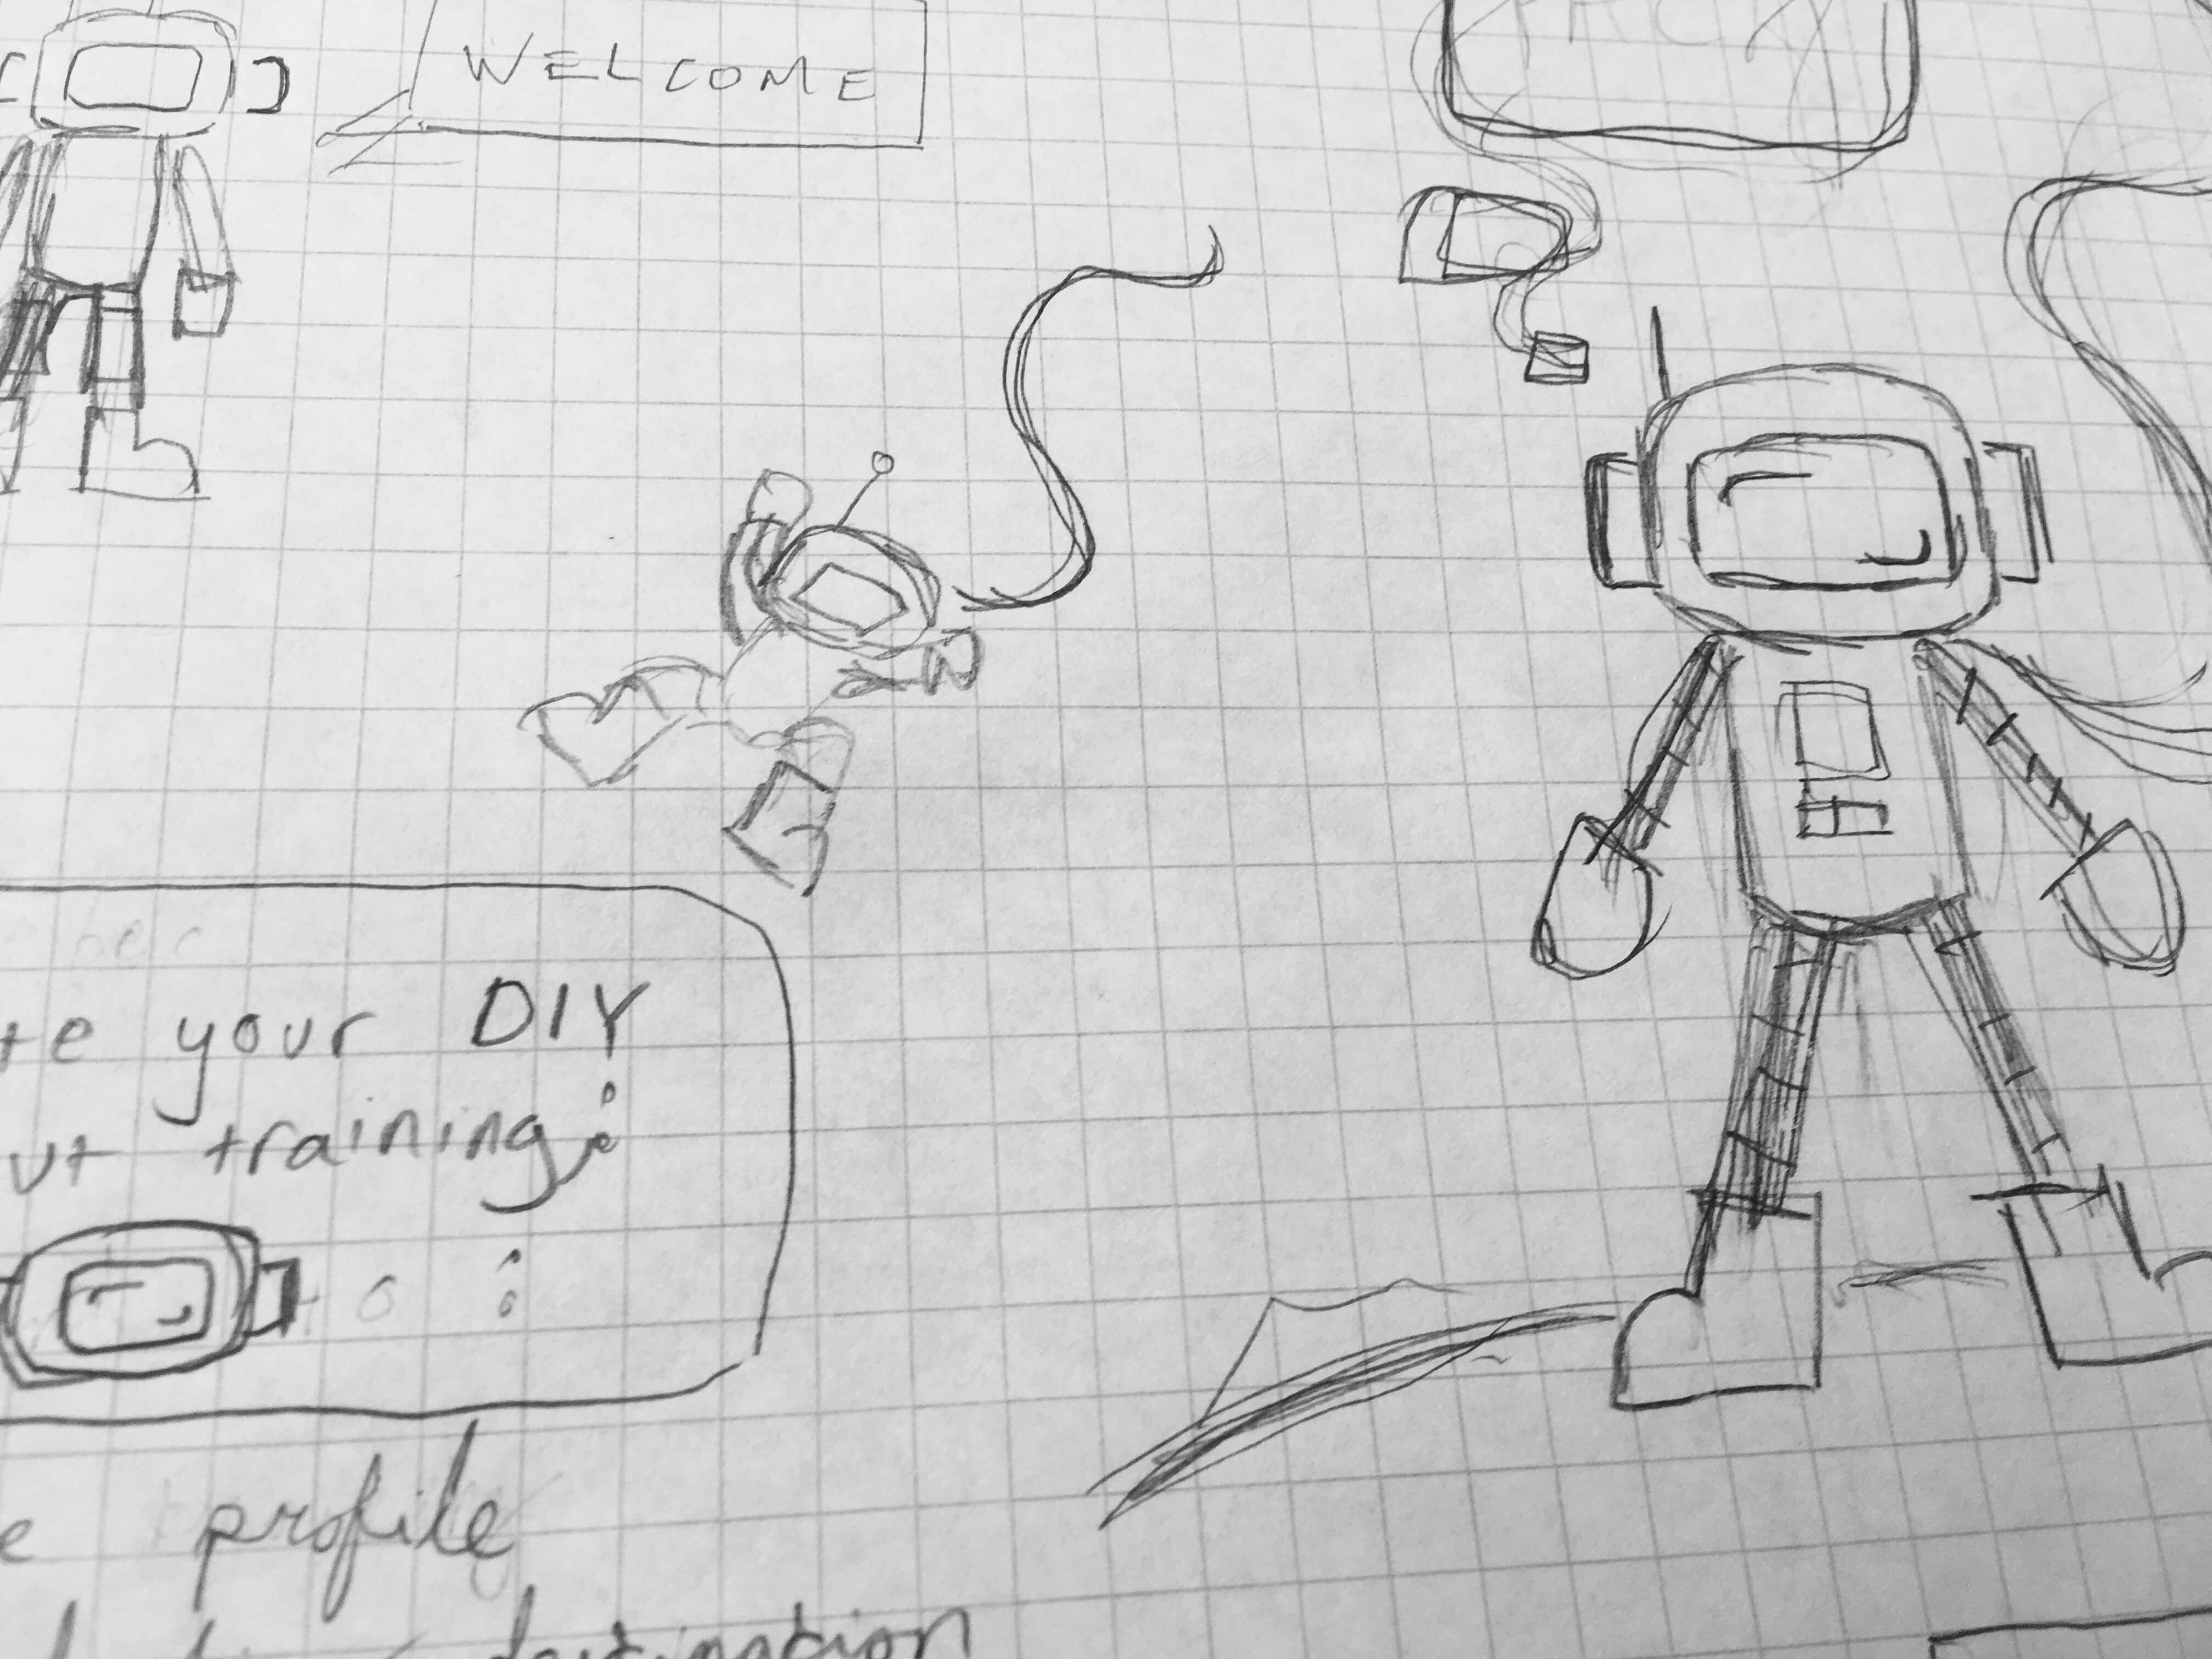 Sketching astronaut to guide users through the onboarding process